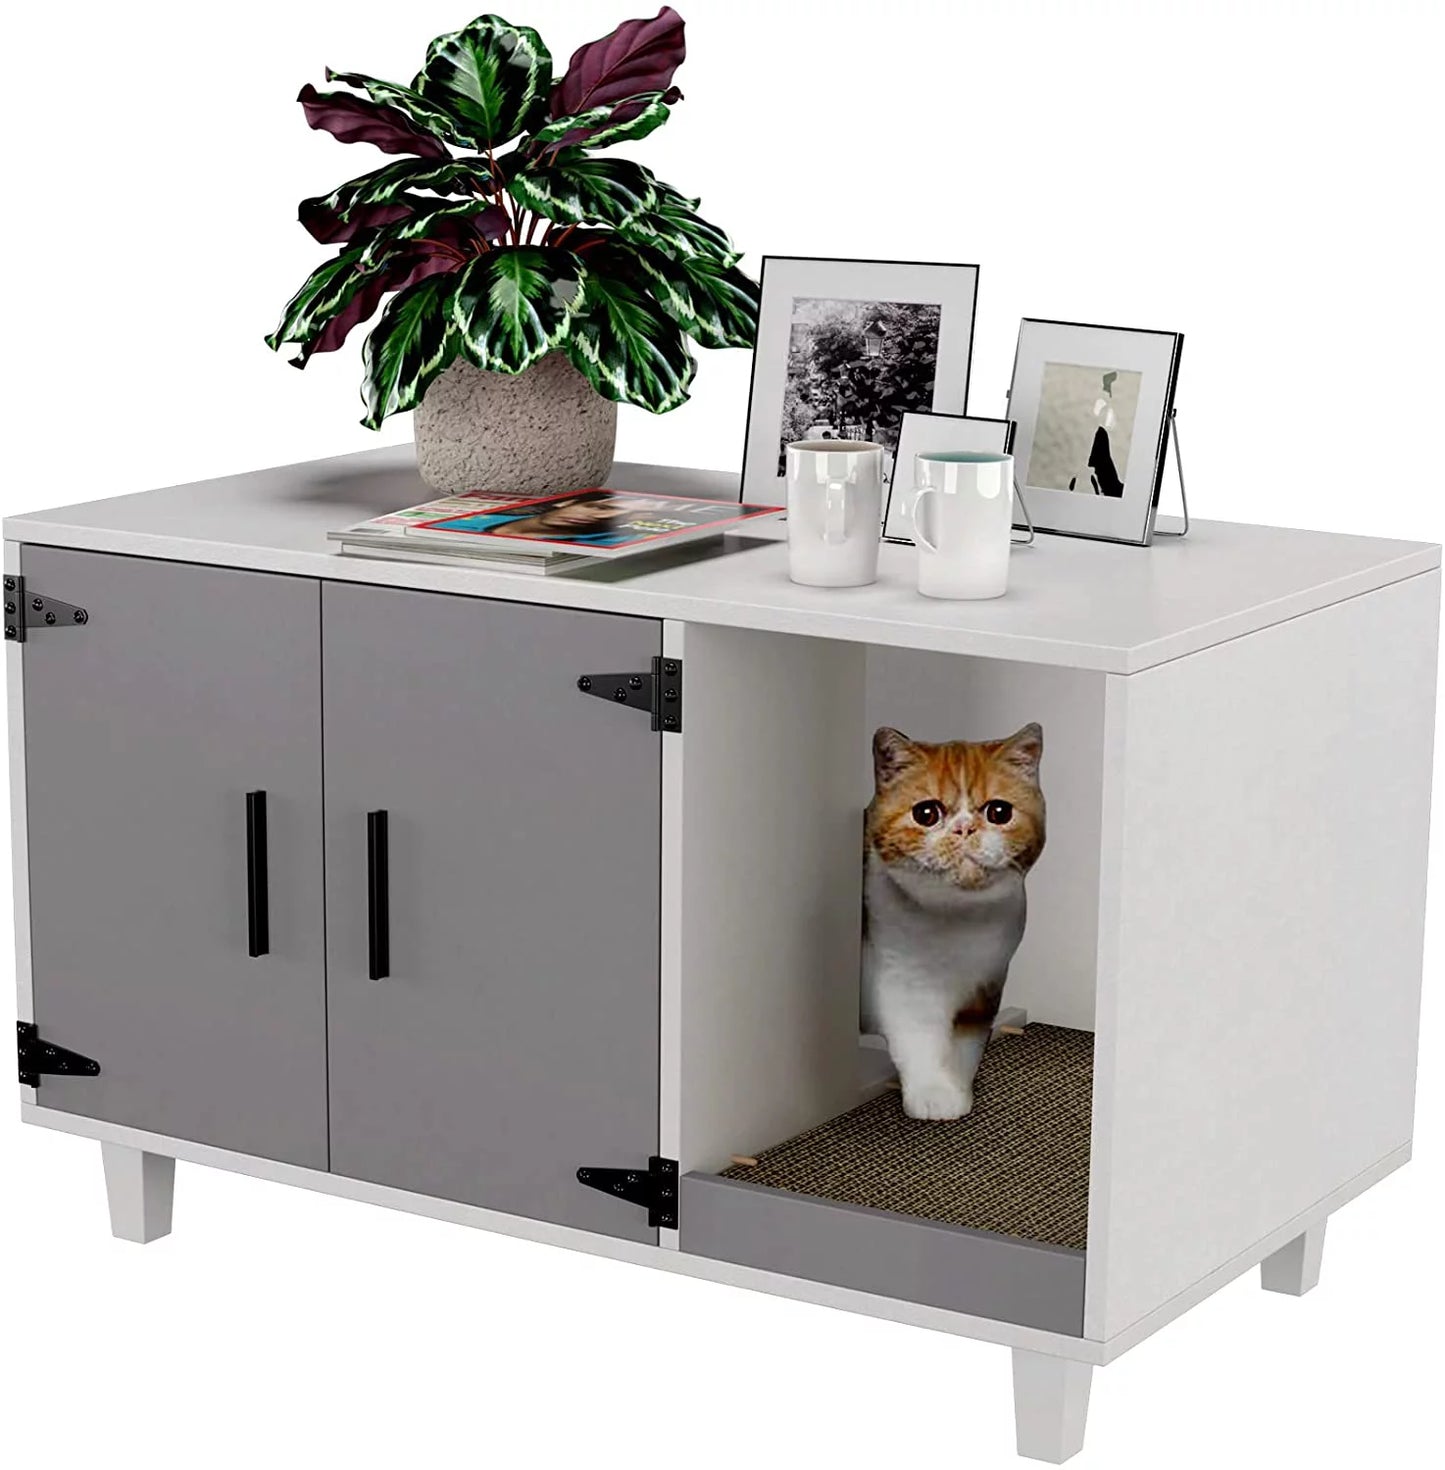 GDLF Pet Crate Cat Washroom Hidden Litter Box Enclosure as Table Nightstand with Scratch Pad,Stackable Animals & Pet Supplies > Pet Supplies > Cat Supplies > Cat Furniture GDLF Grey White  